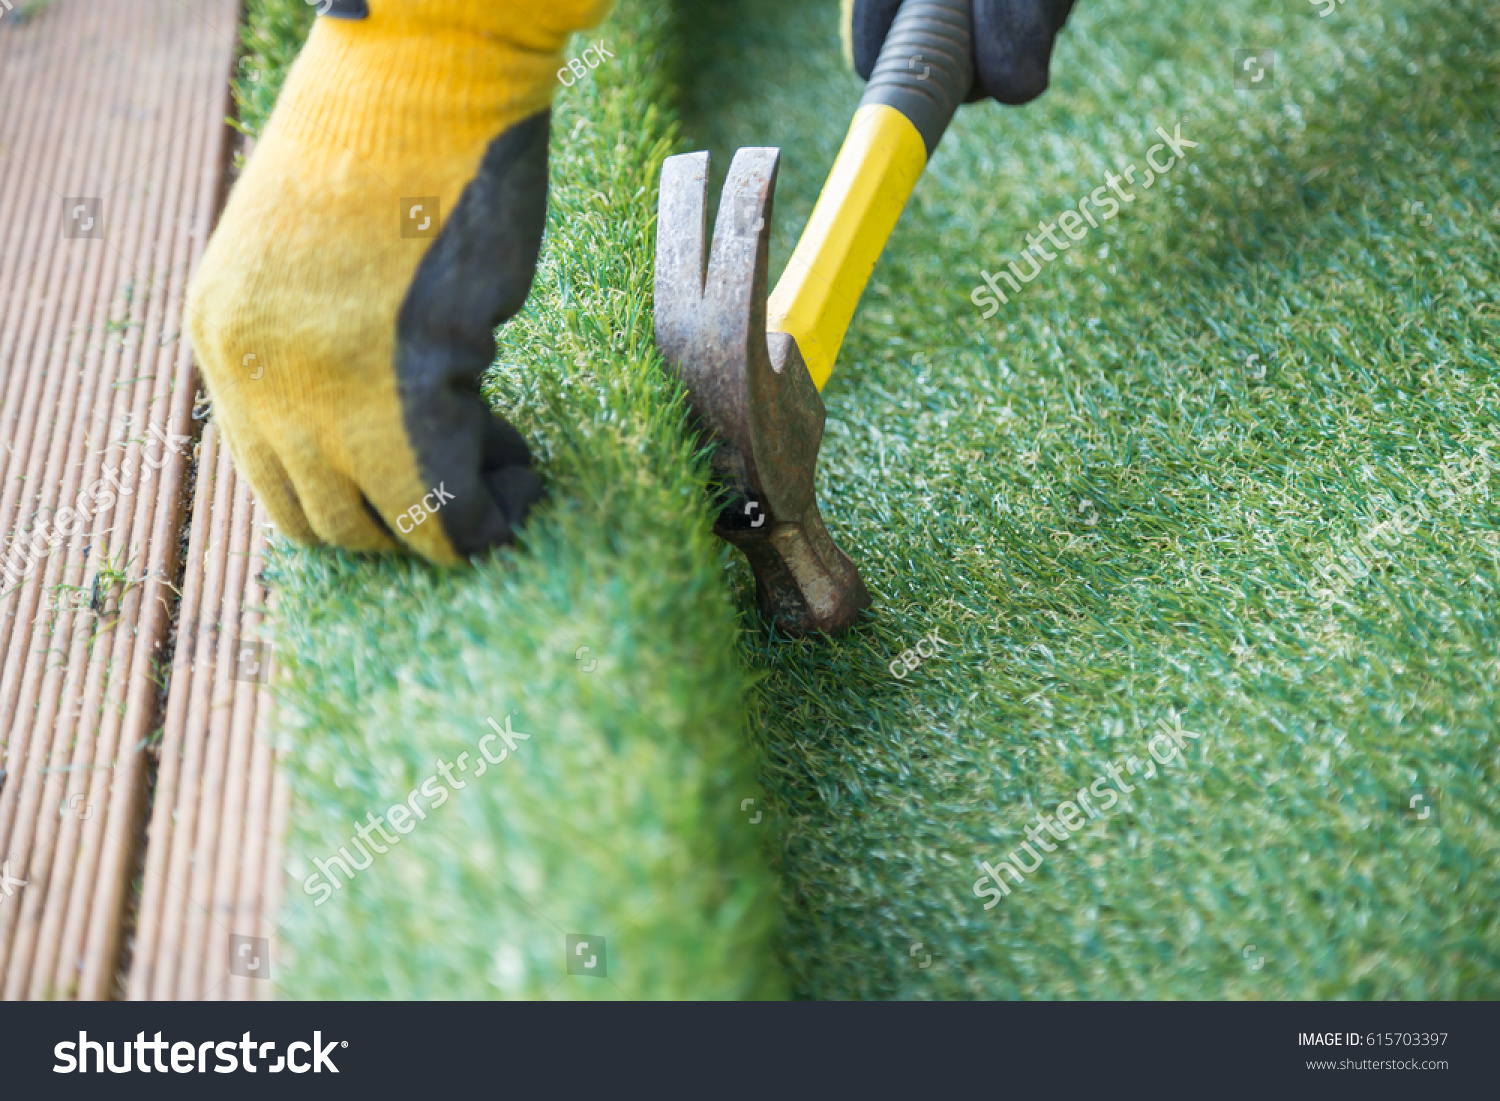 Artificial grass, turf installation alongside decking. A hammer in being used to nail the turf into place. A yellow work glove can be seen. #615703397